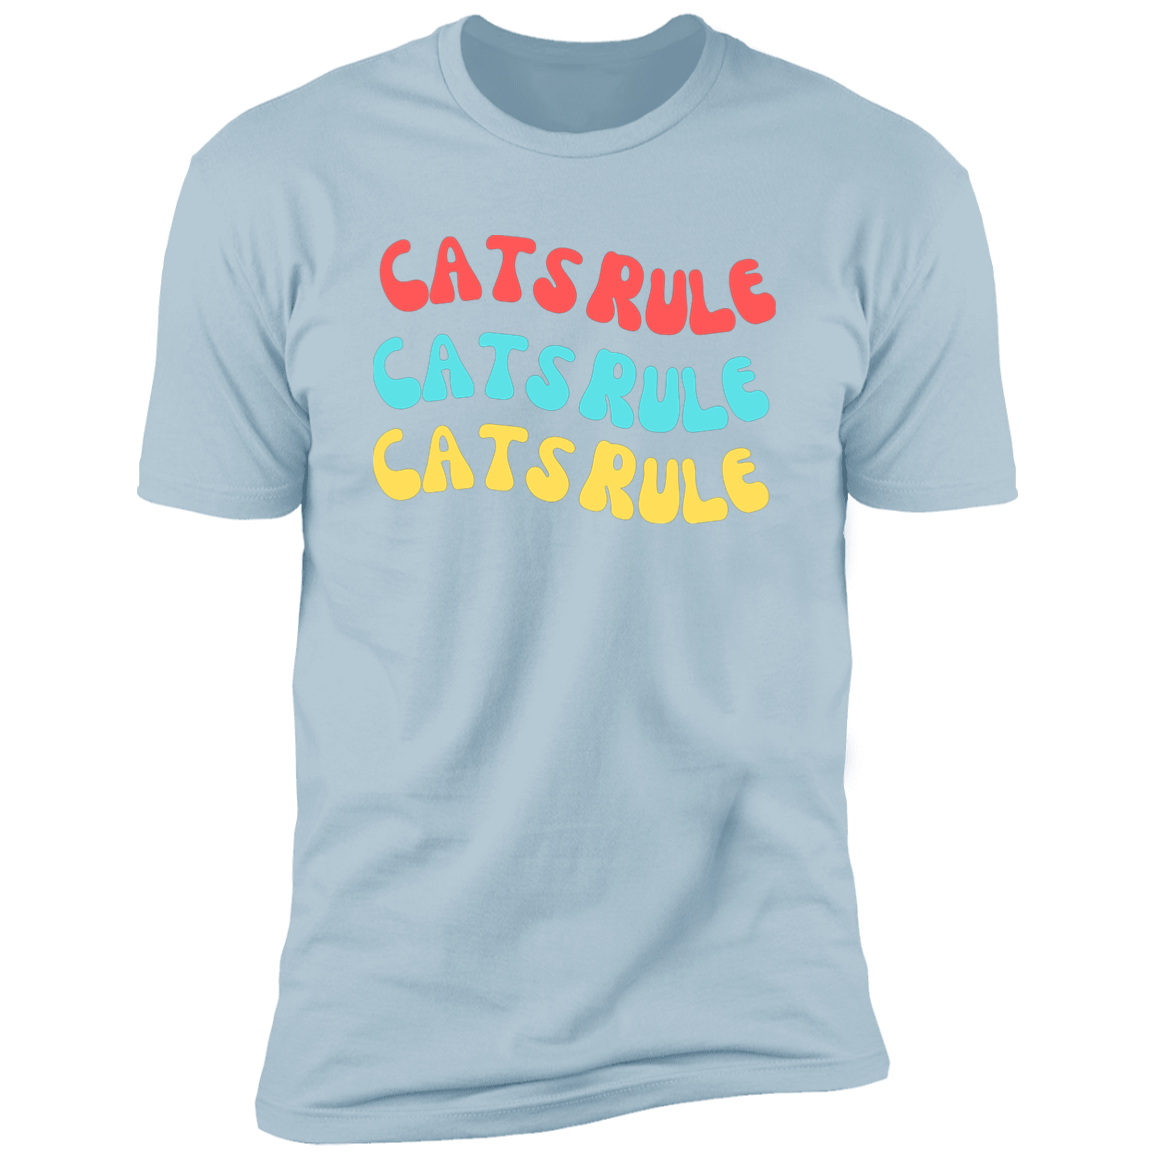 Cats Rule T-shirt, Cat Shirt for humans, in light blue